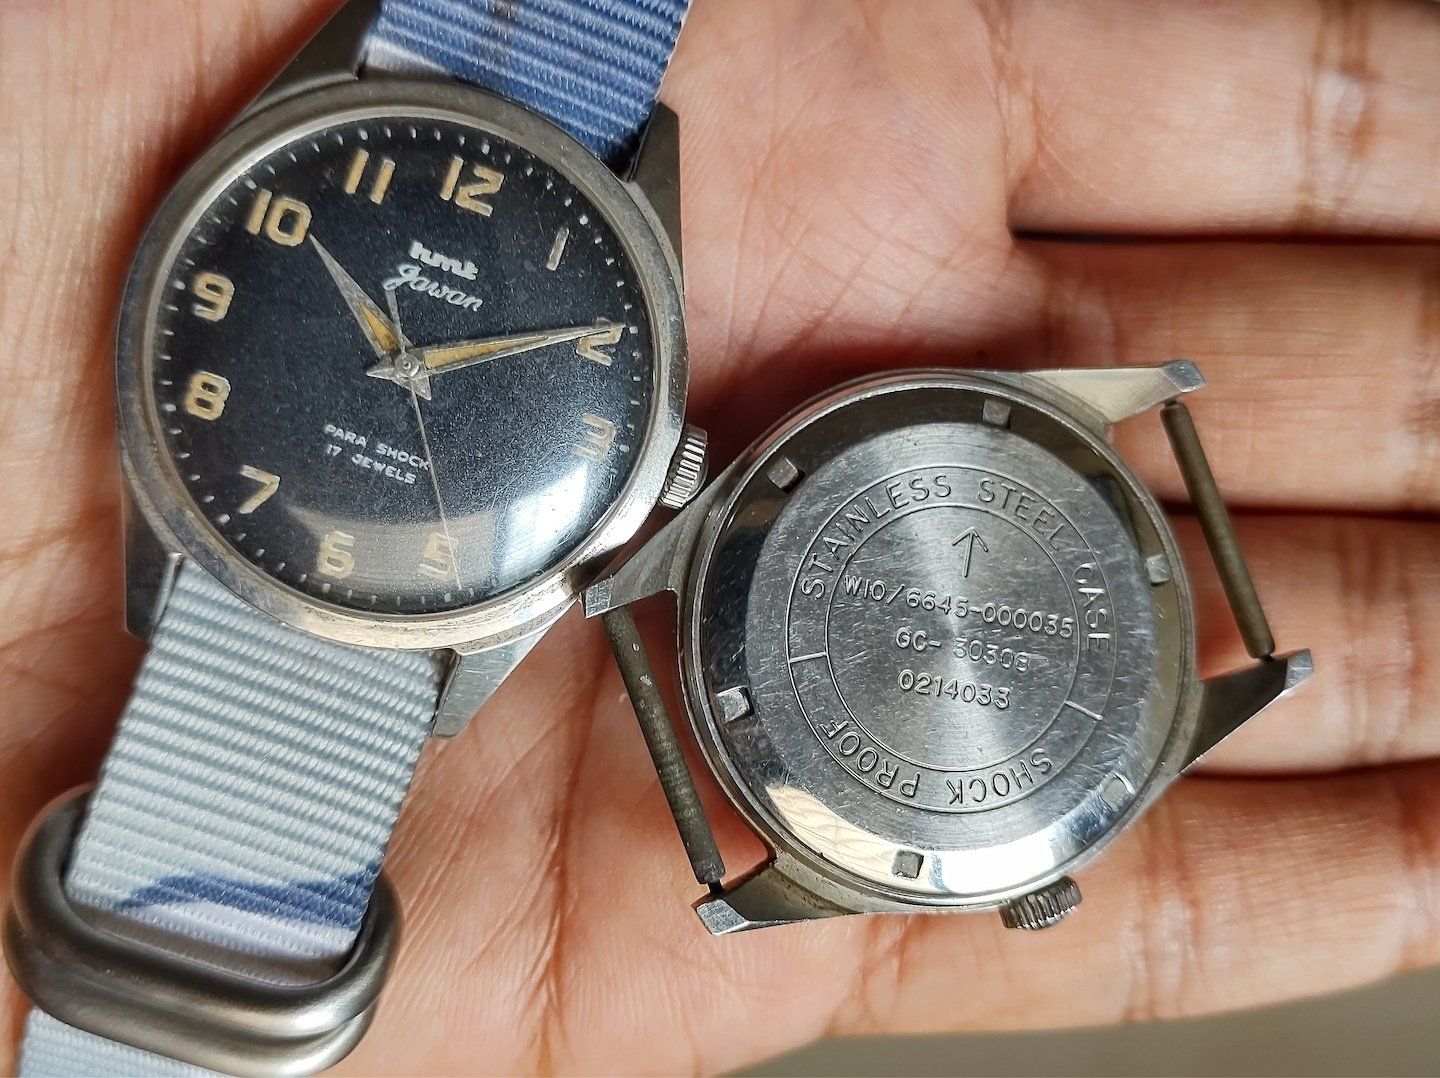 HMT Jawan with Broad Arrow marking and W10 prefixed serial number